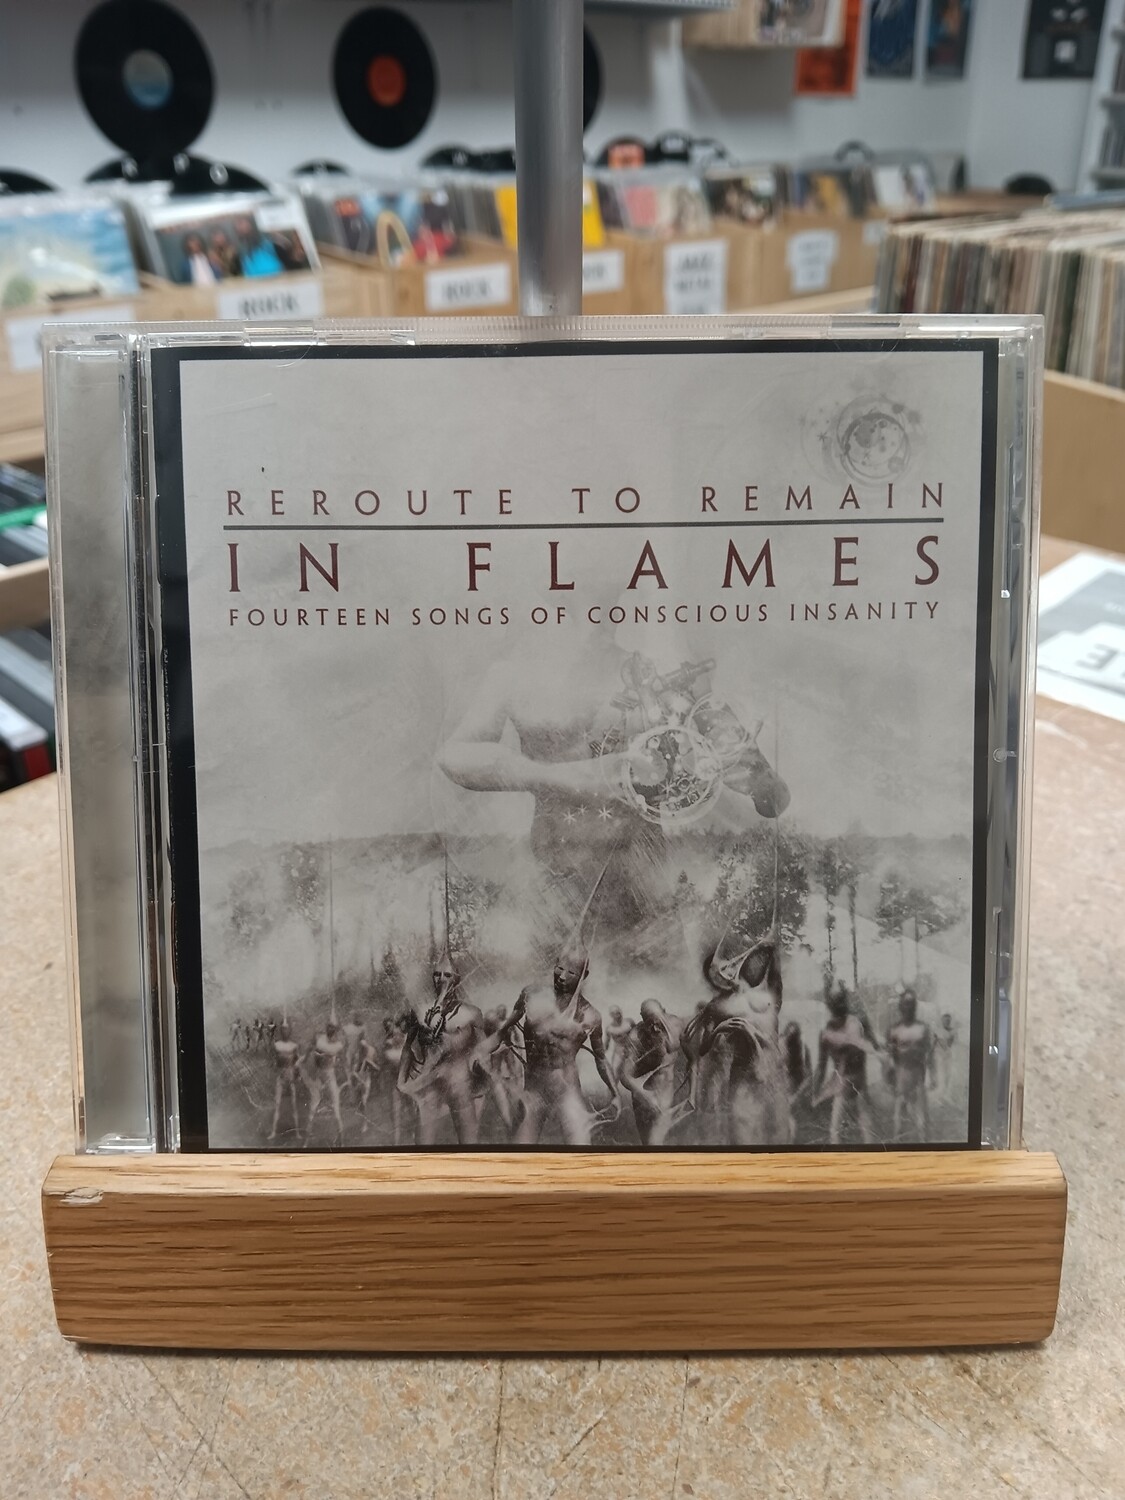 In Flames - Reroute to Remain (CD)